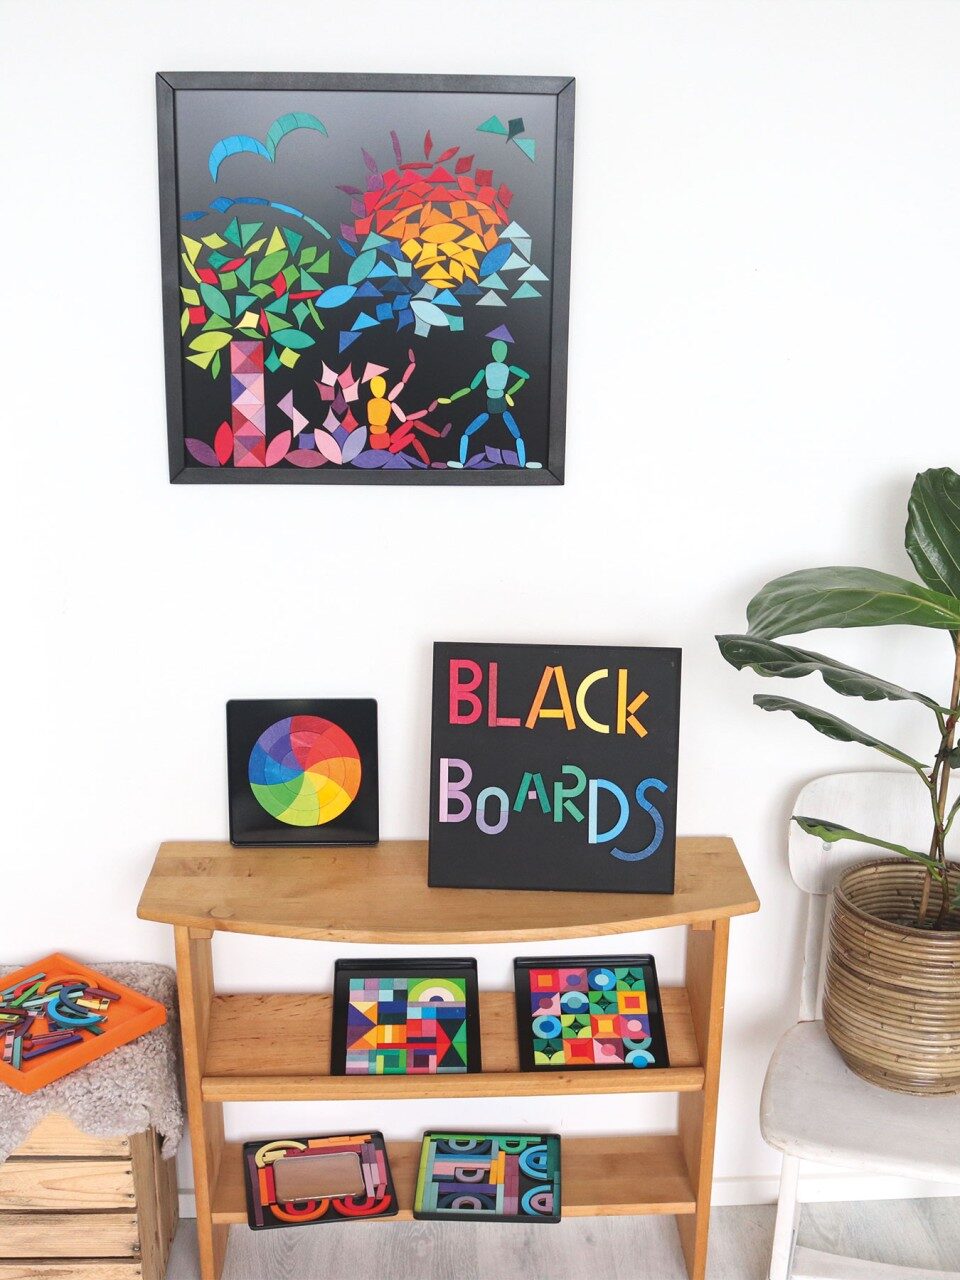 Grimm's Montessori Black Board Toy set up in a playroom.